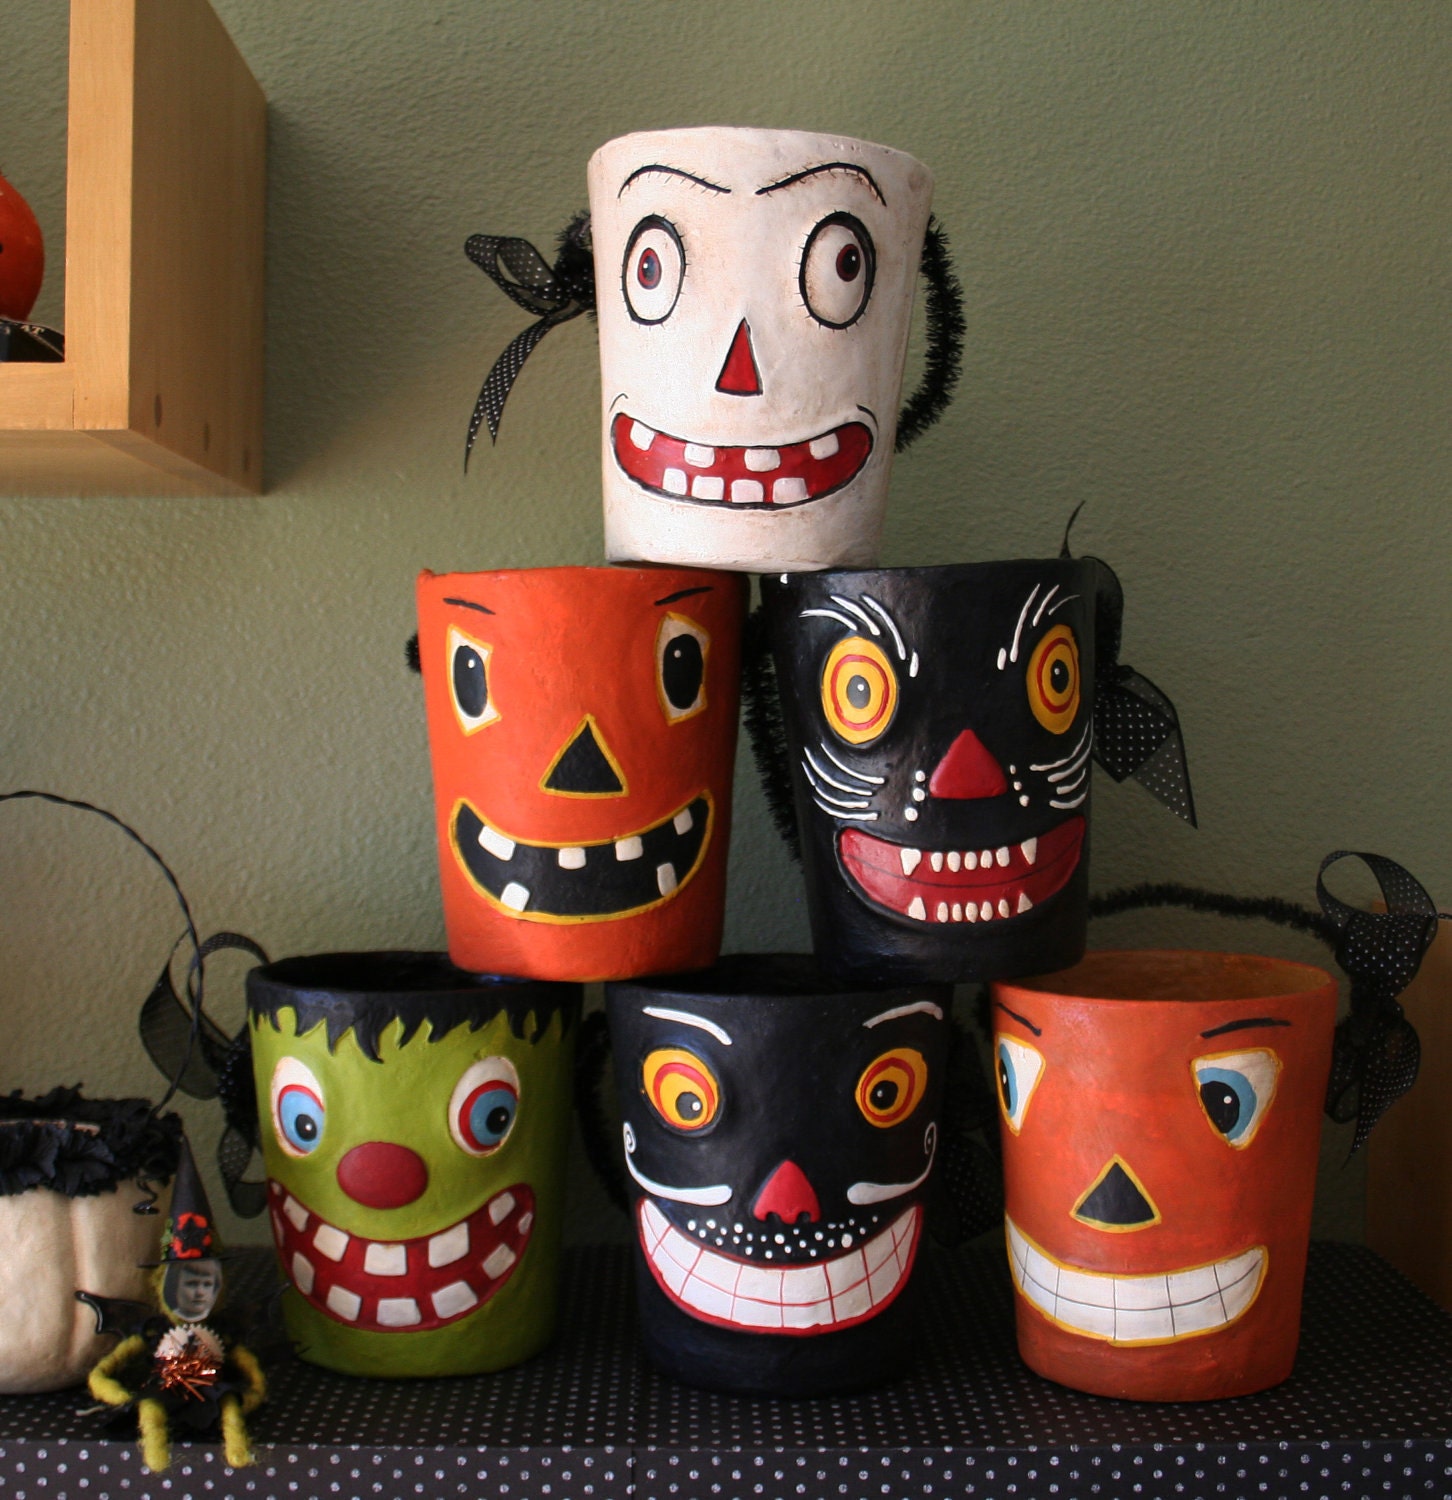 6 vintage style halloween paper mache containers...the complete collection